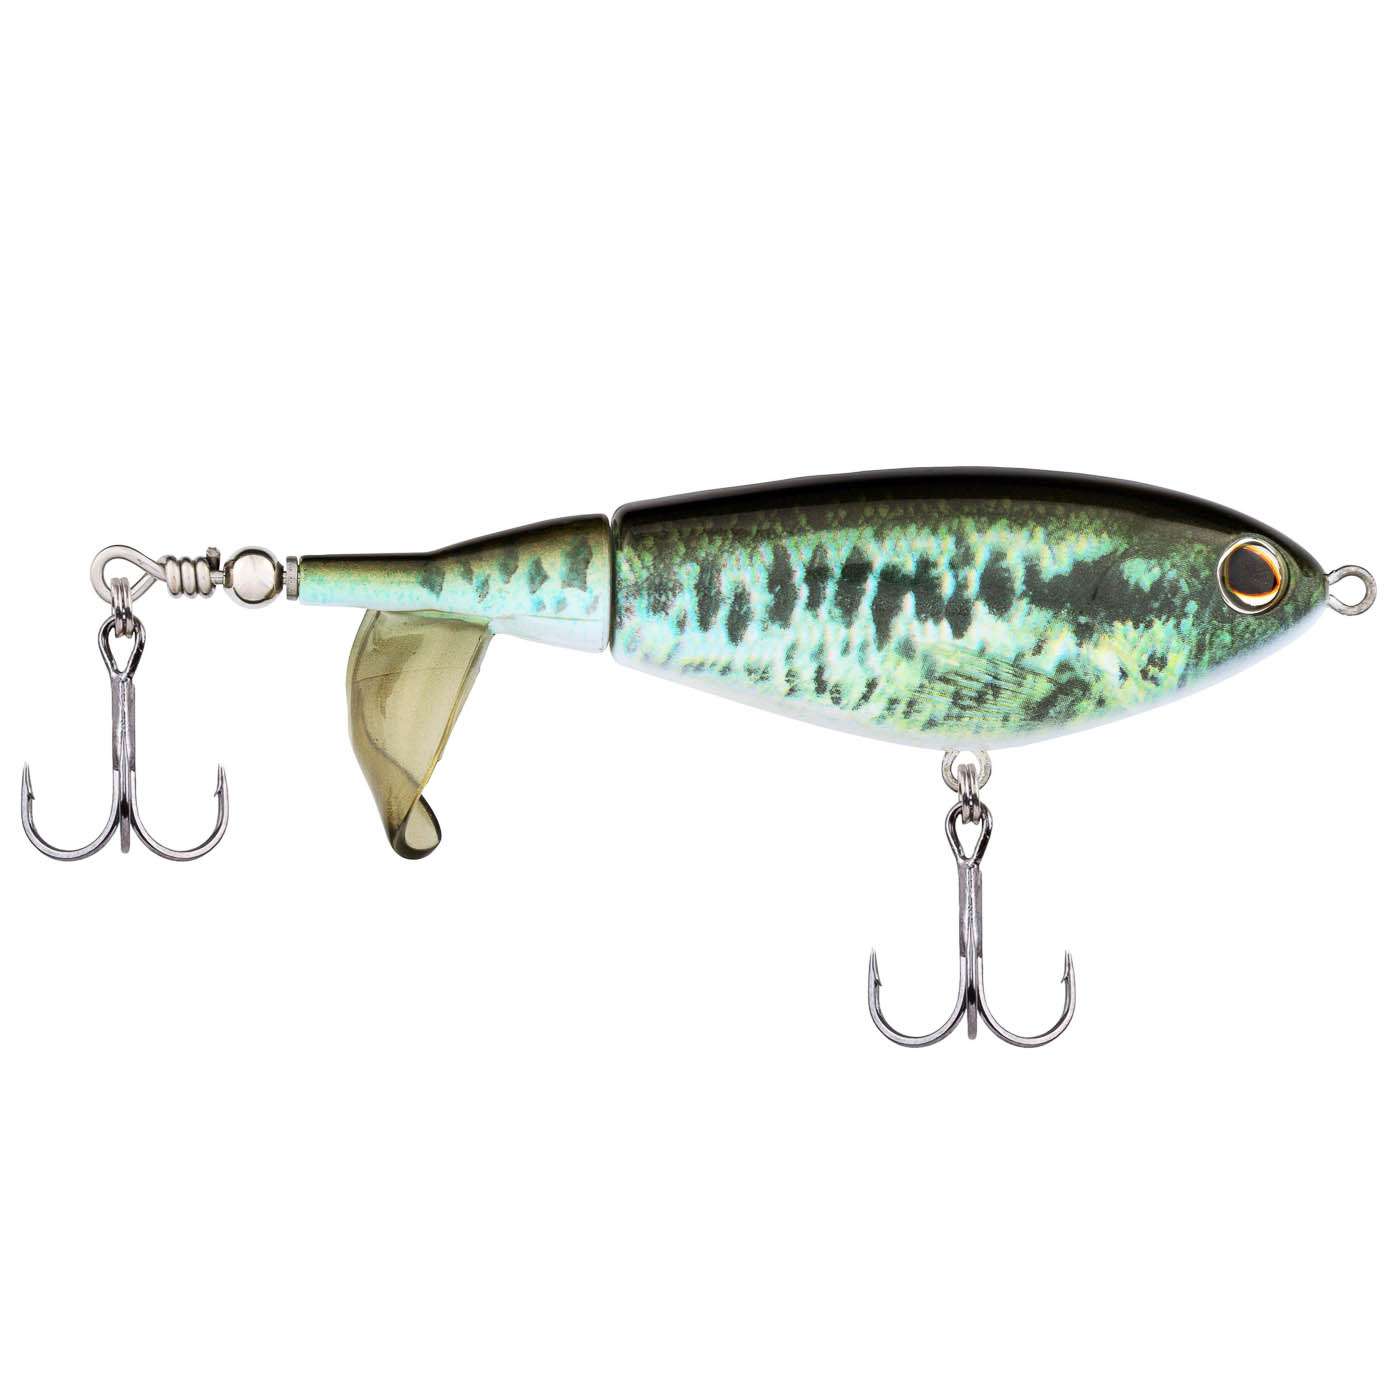 <p><strong>Berkley Choppo</strong></p><p>This proven topwater adds new high-definition HD Tru Colors to the lineup. Those are HD Baby Bass, HD Blueback Herring, HD Bluegill, HD Golden Shiner, HD Rainbow Trout and HD Threadfish Shad. Built with a super durable cupped propeller tail, the Berkley Choppo produces an enticing plopping sound and a generous amount of spray that calls fish to the surface to strike. The precision weighting of the Berkley Choppo also ensures that the tail begins spinning immediately and it swims perfectly straight at a variety of speeds. Available September 2021. $10.99. <a href=